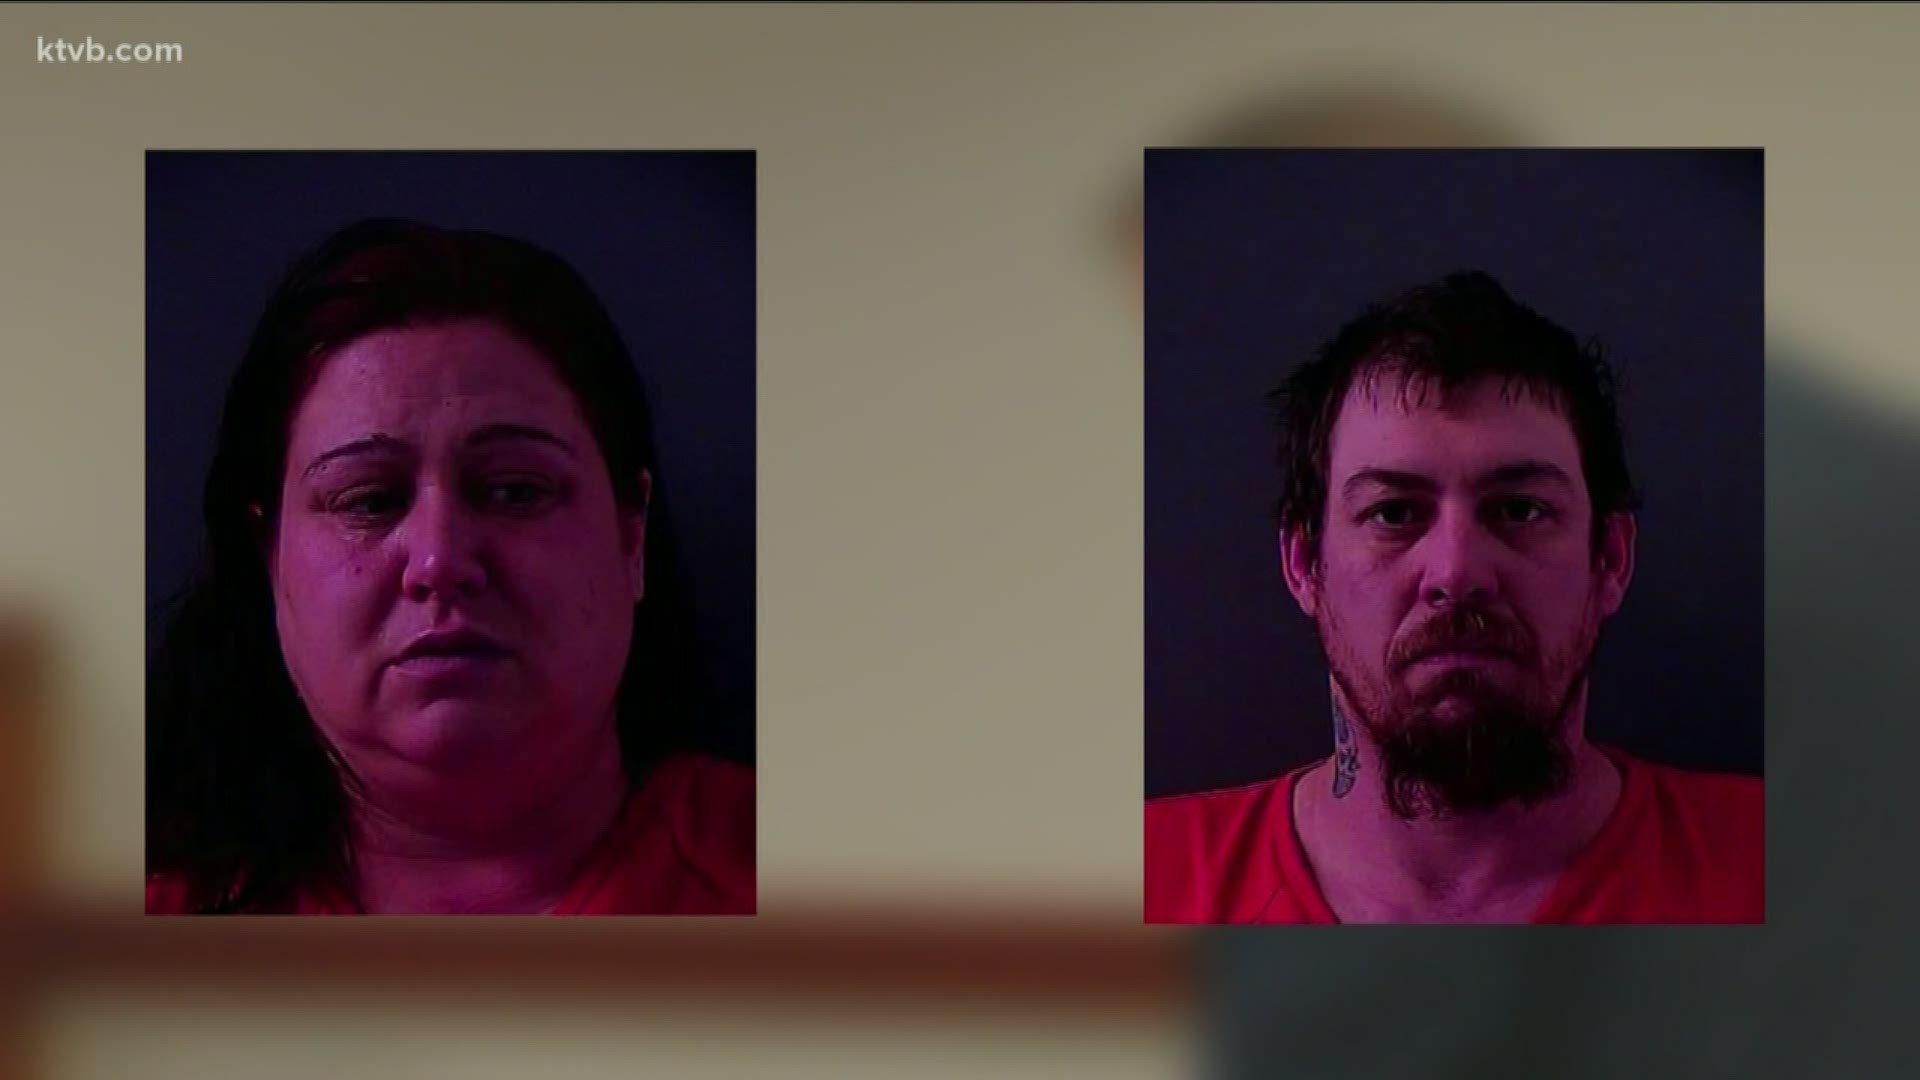 A grand jury indicted charges Duncan and Melissa Transue with four counts of felony injury to a child.